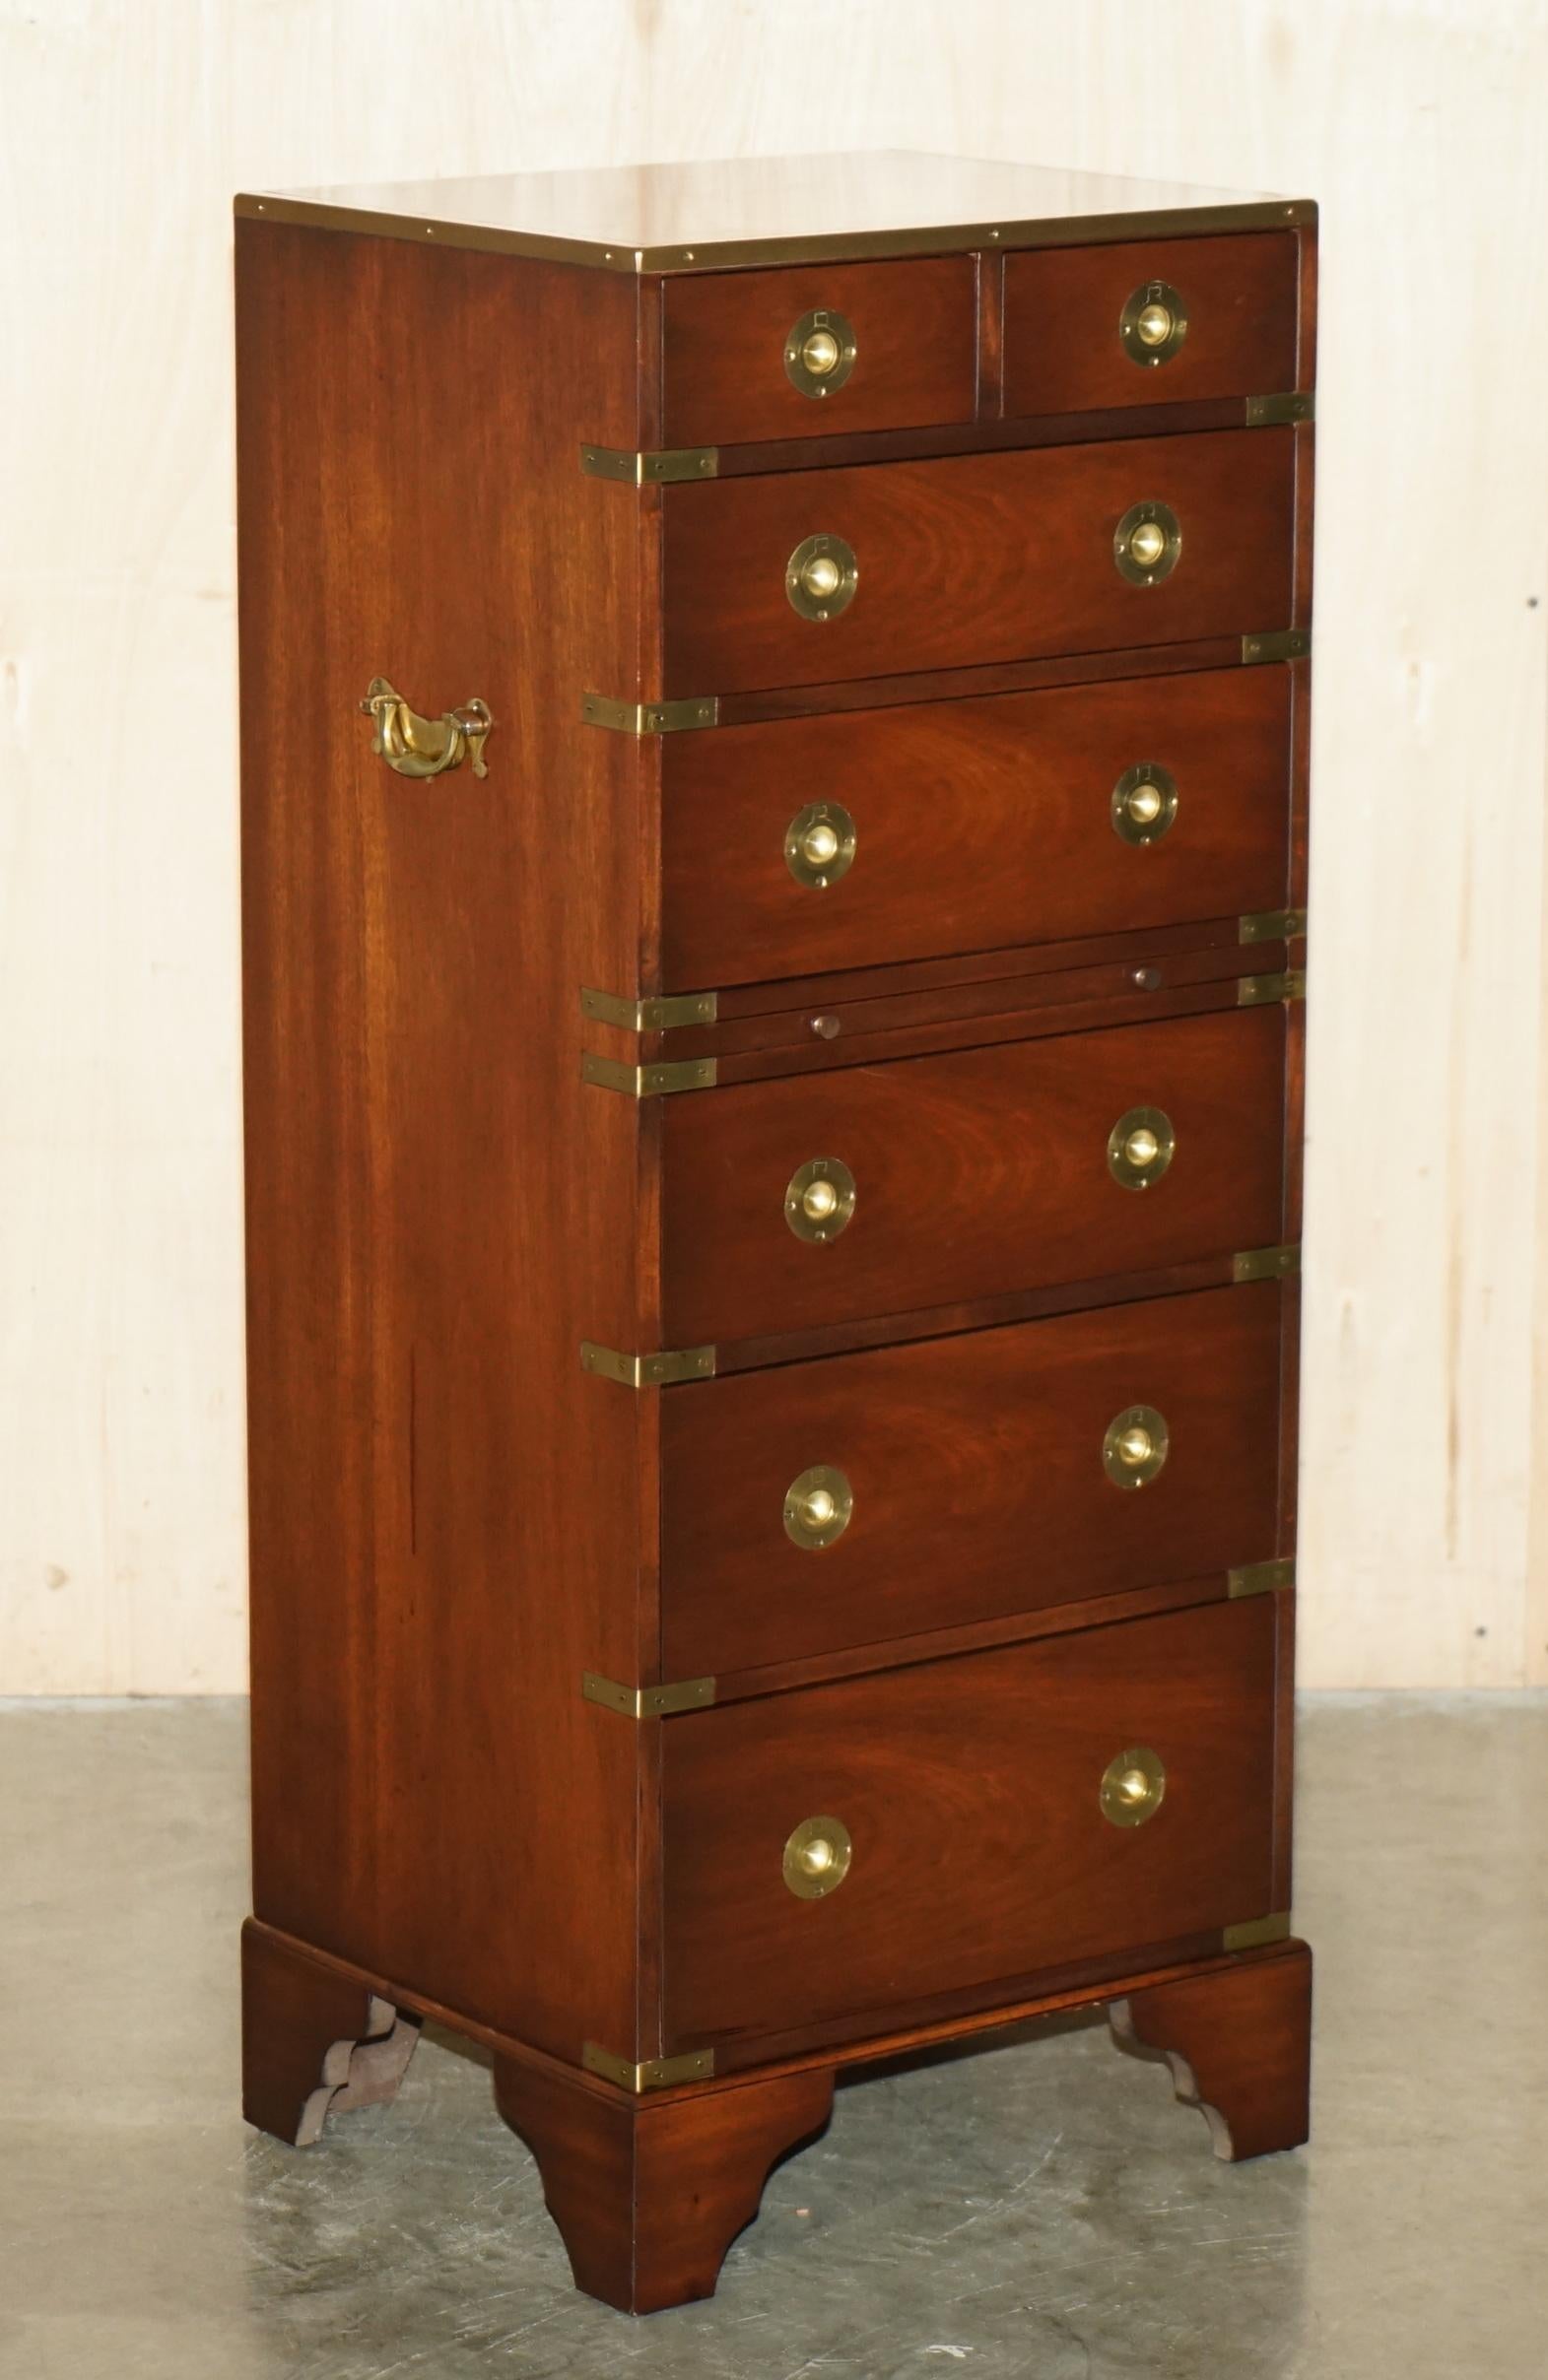 Royal House Antiques

Royal House Antiques is delighted to offer for sale this stunning, hand made in England Vintage Military Campaign tallboy chest of drawers with green Leather gold leaf embossed slip serving tray 

Please note the delivery fee